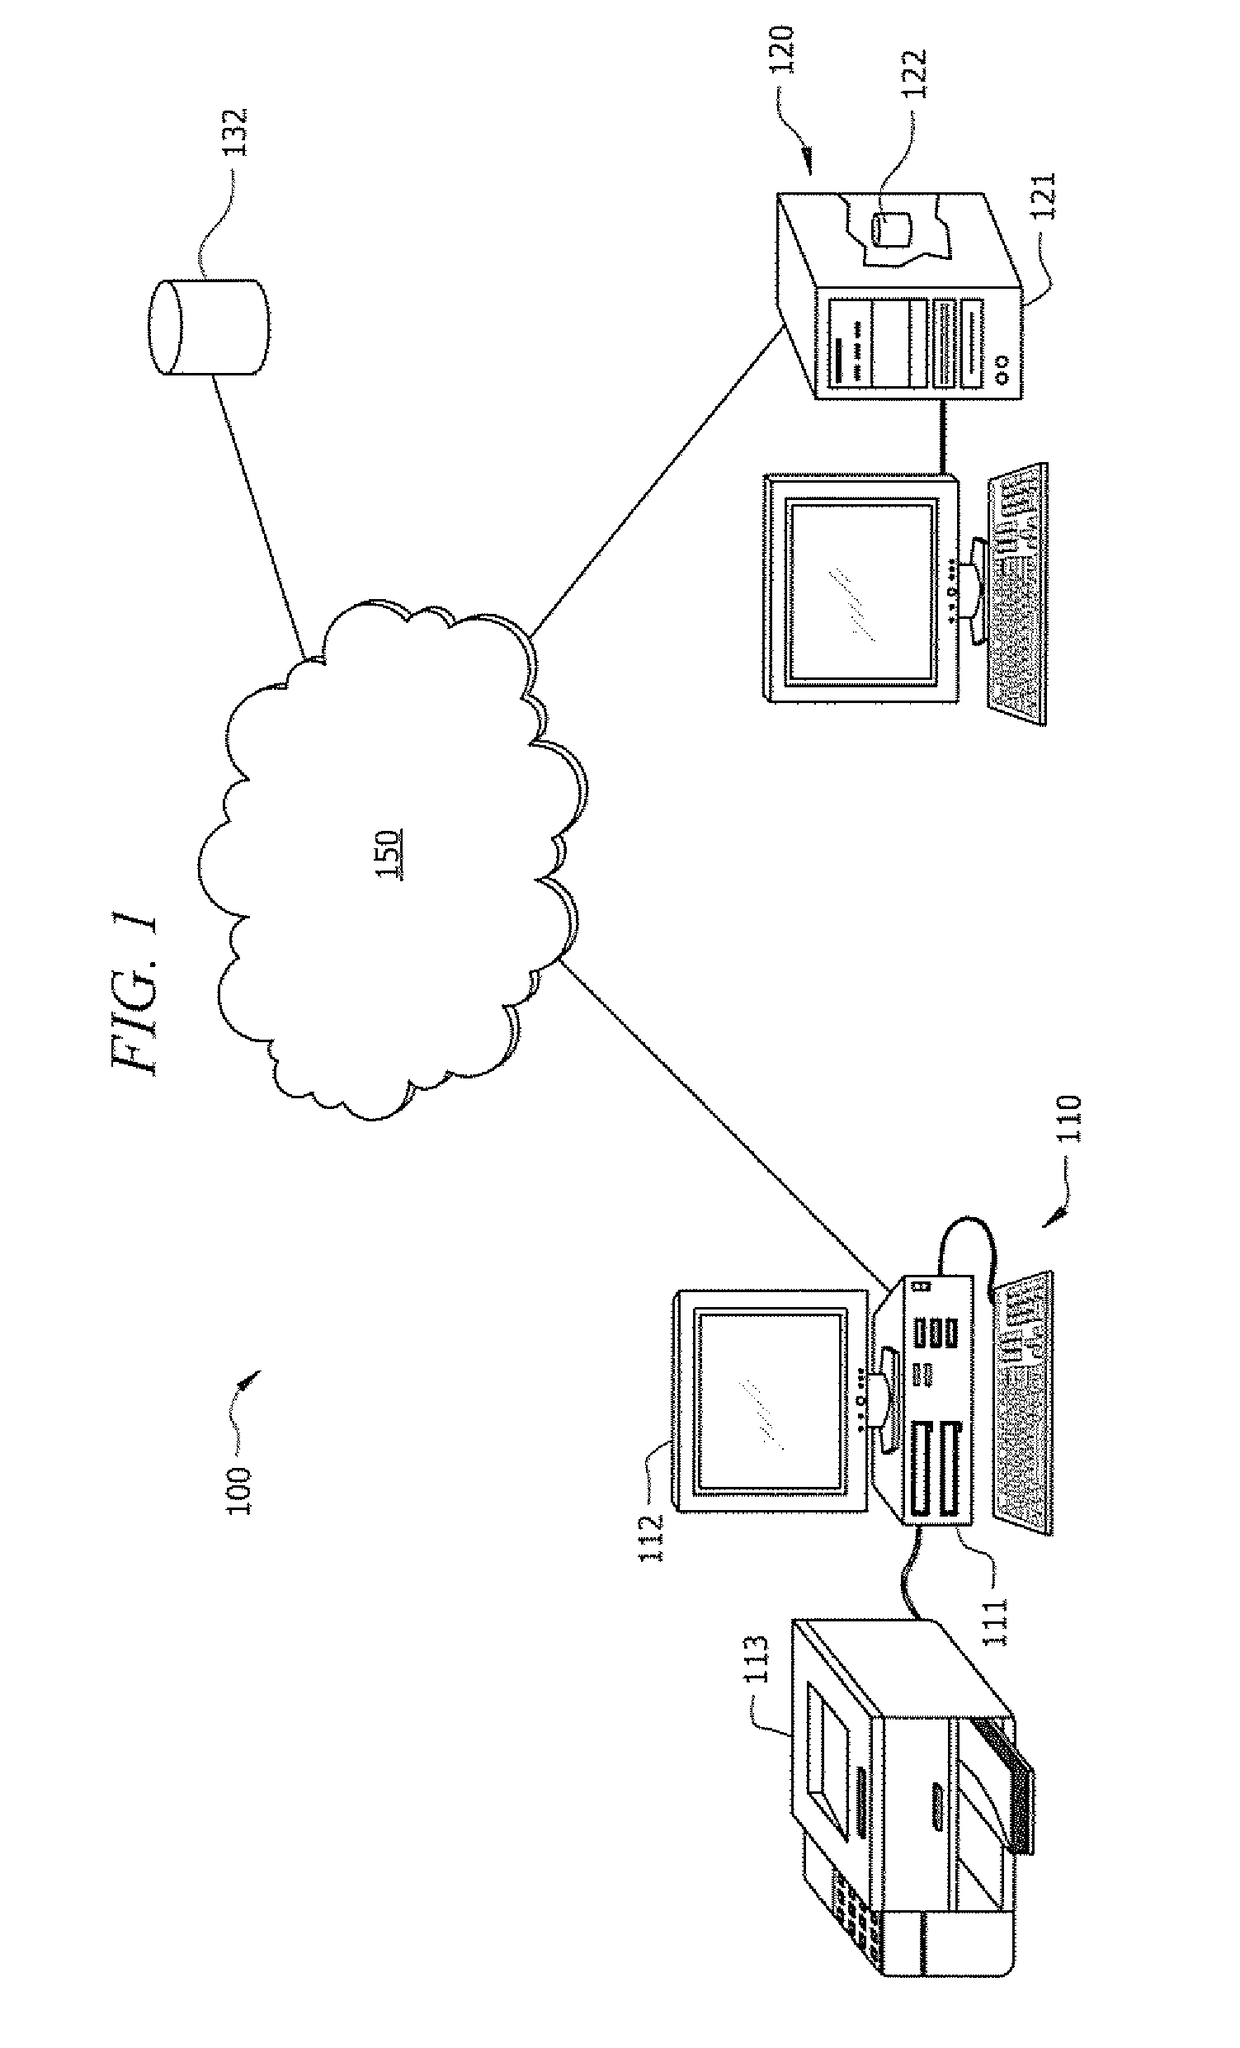 Systems and methods for protecting content when using a general purpose user interface application